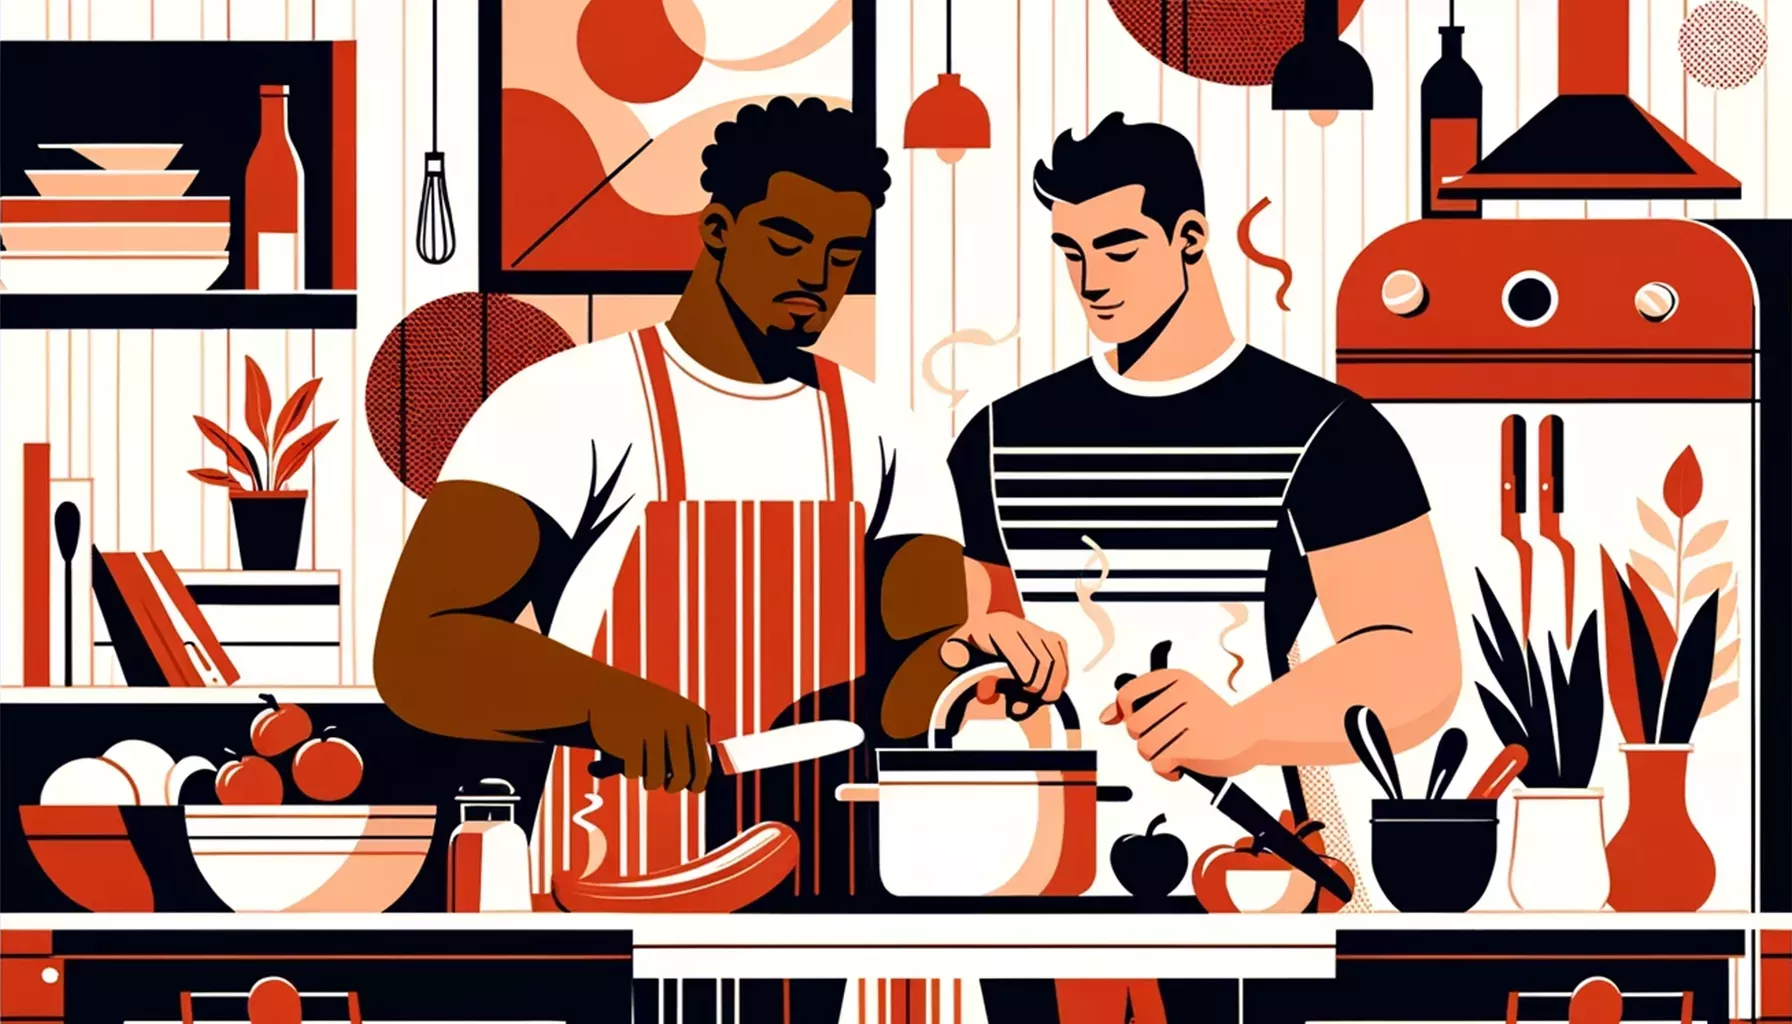 an illustration of two gay men participating in a cooking class at their home.